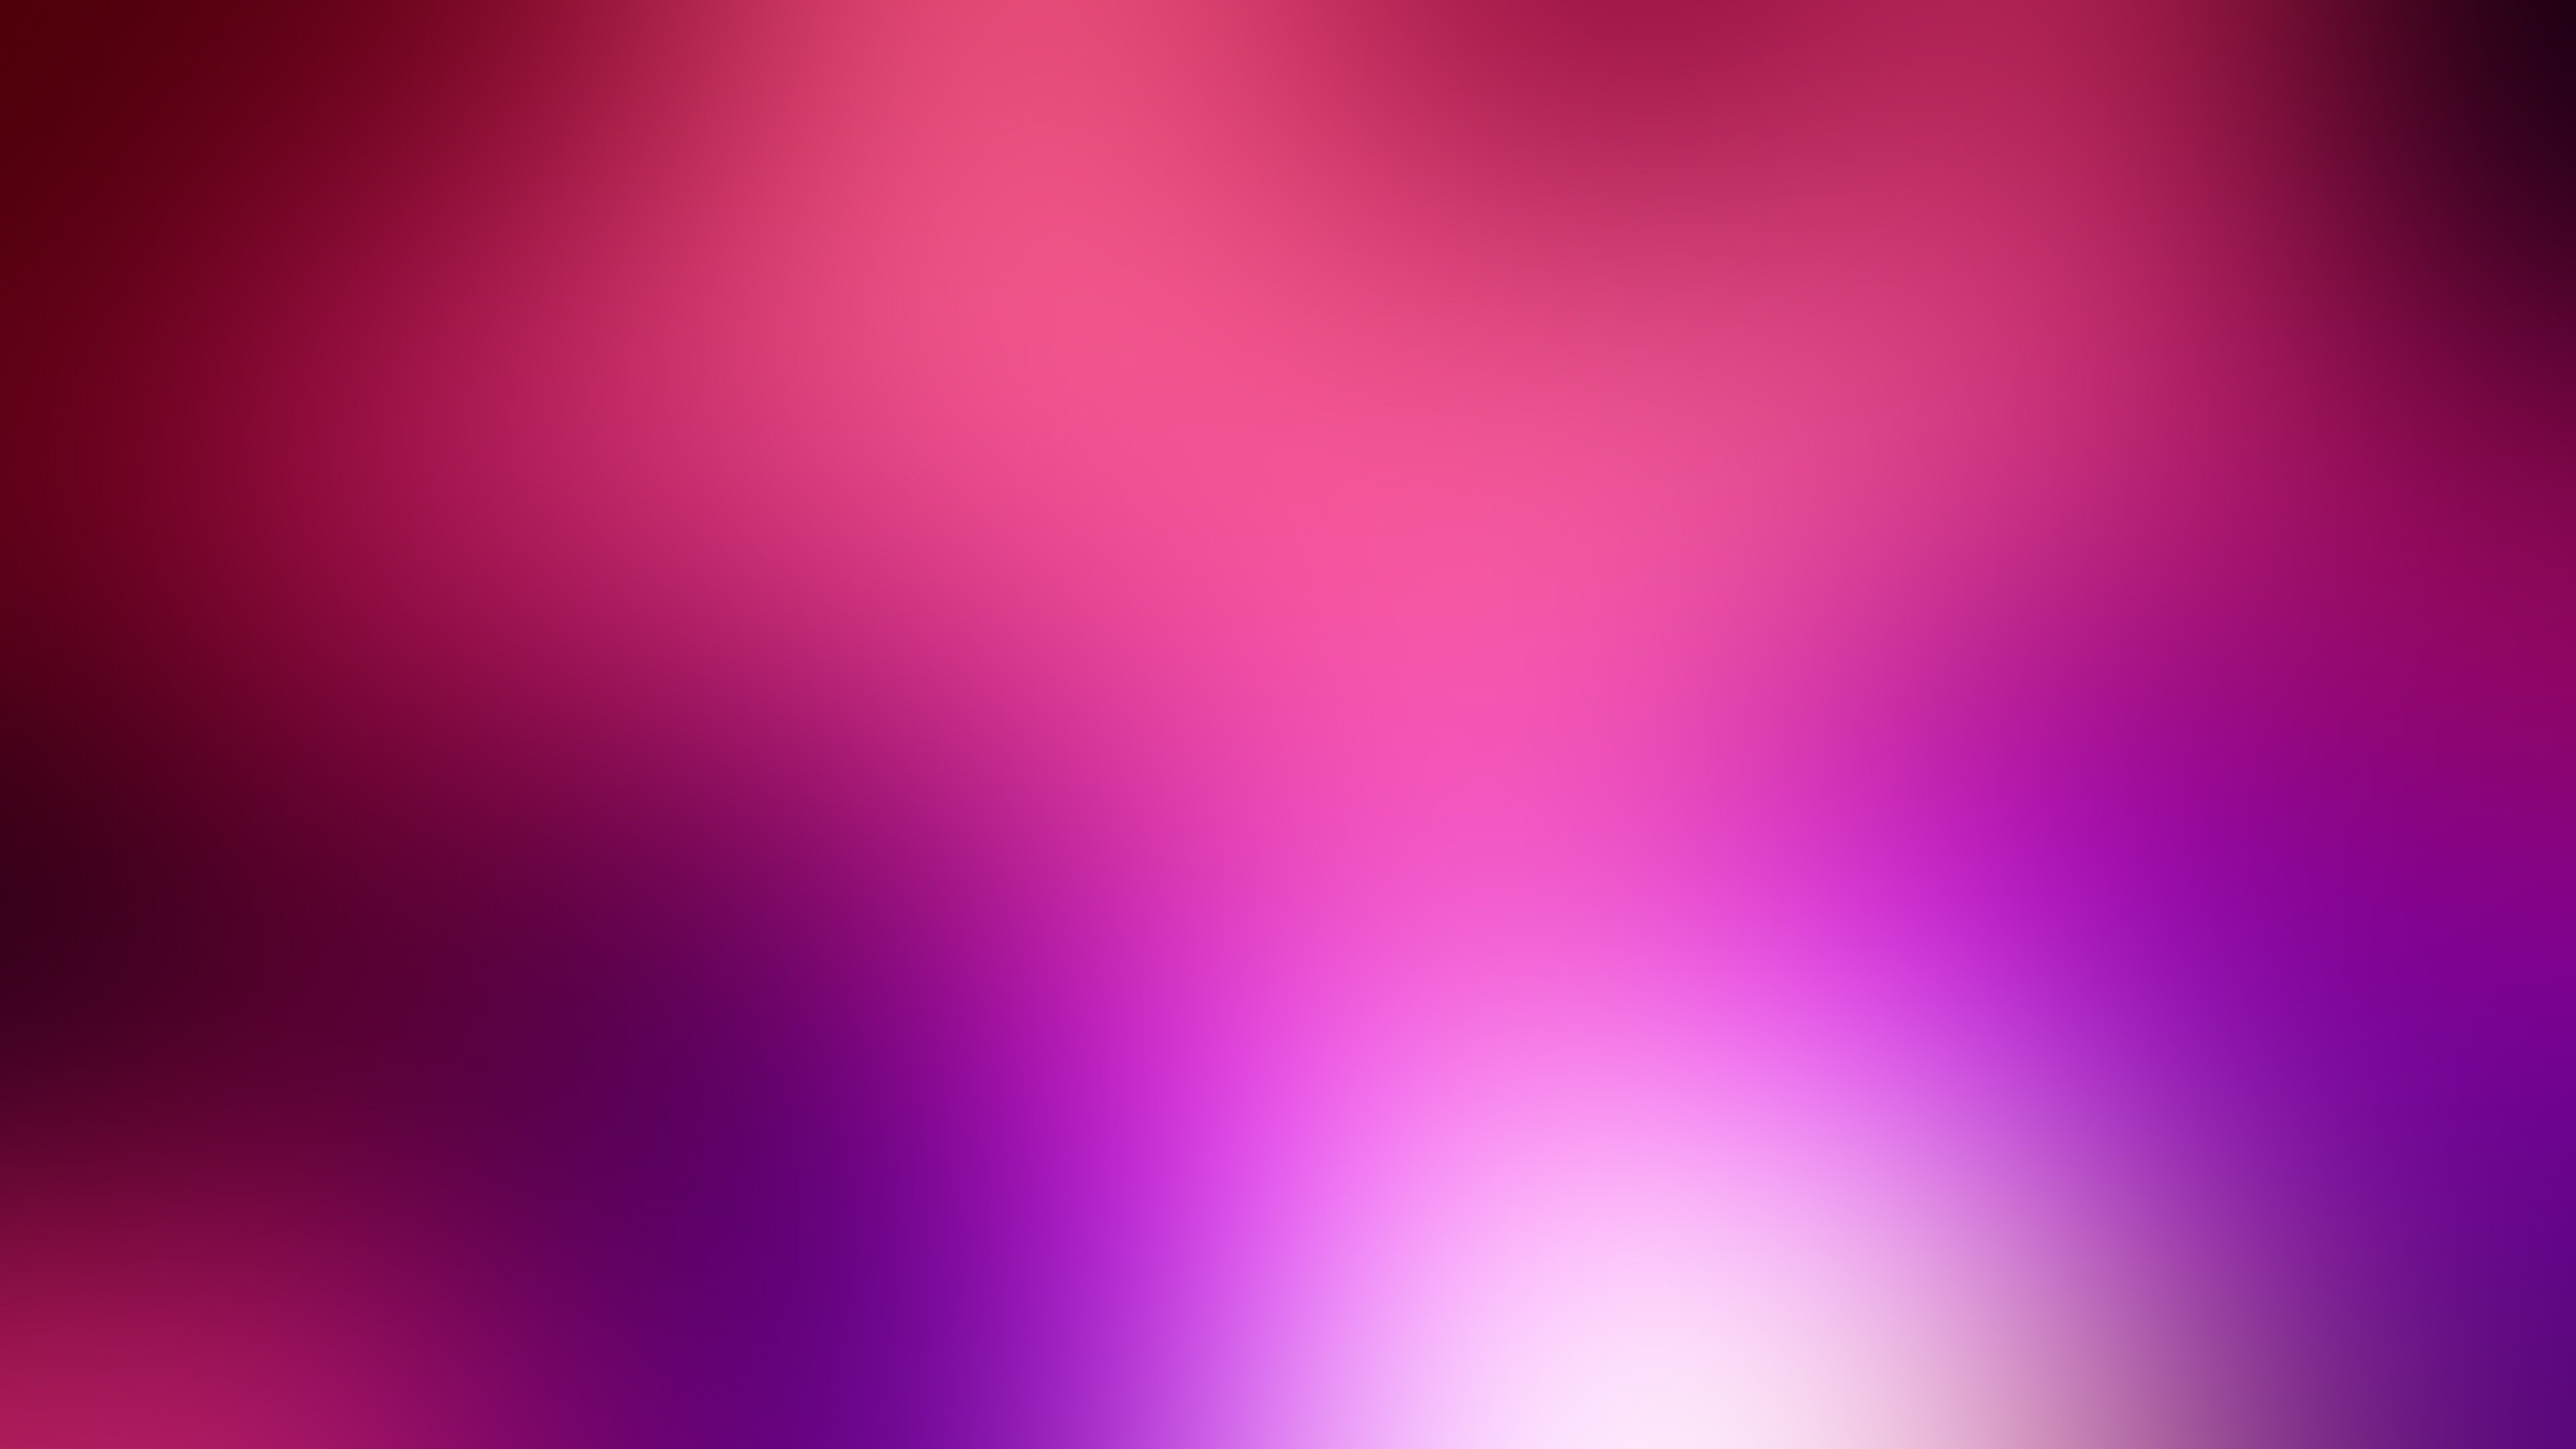 3840x2160 Pink And Purple Wallpapers